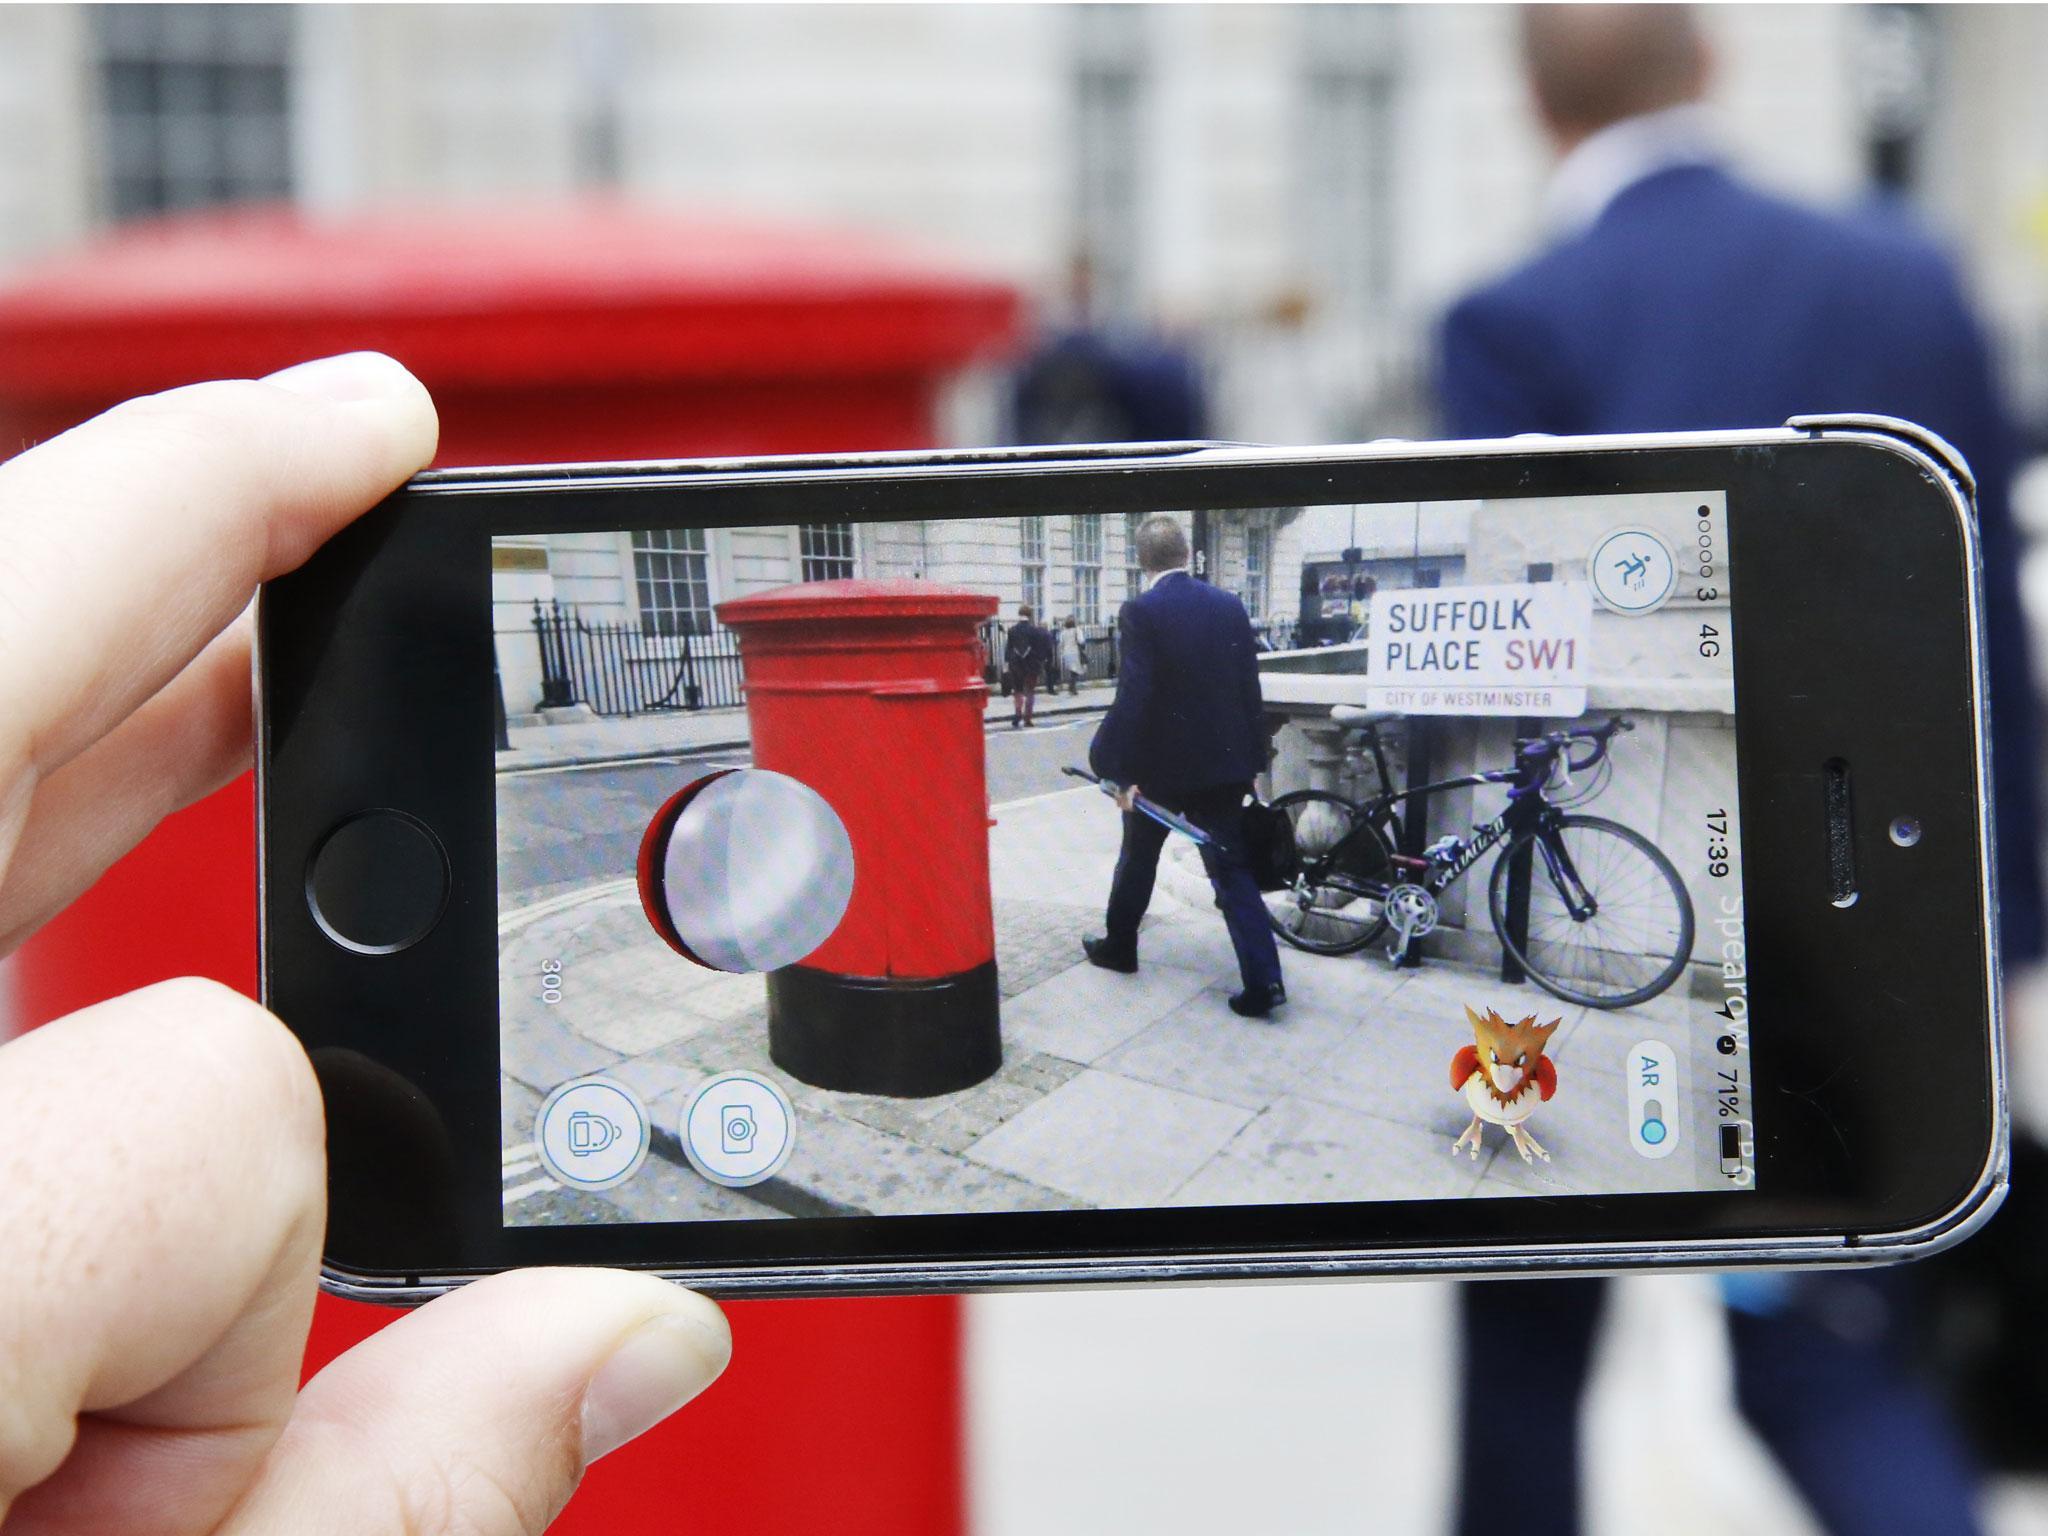 Pokemon Go allows players to catch Pokemon in real life using their smartphones